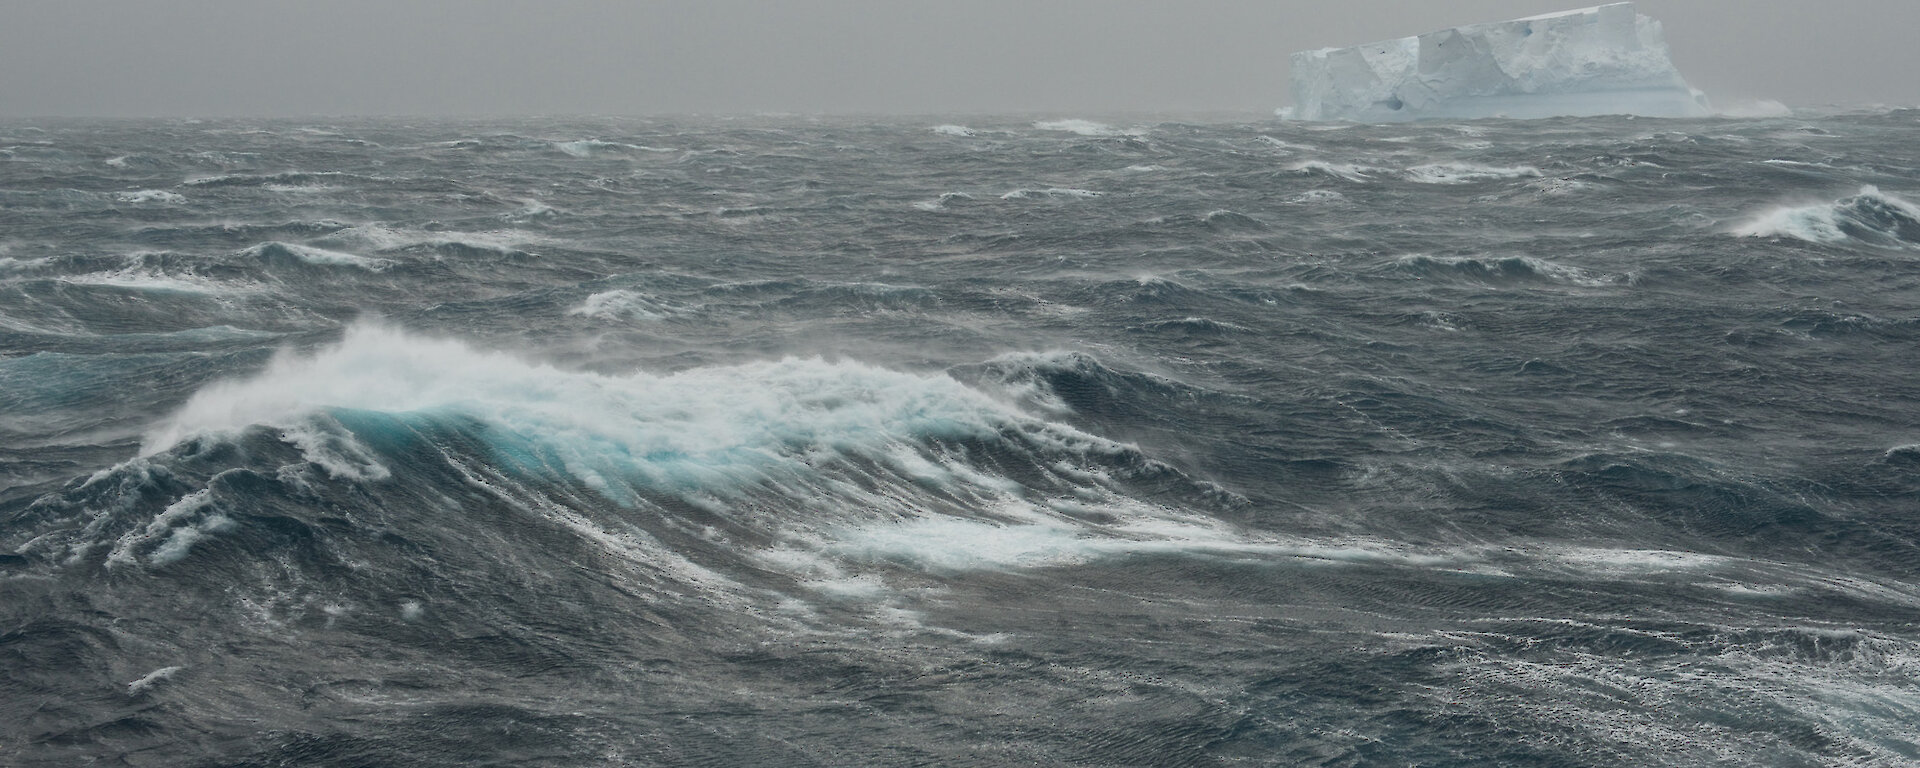 Southern Ocean and iceberg on grey stormy day